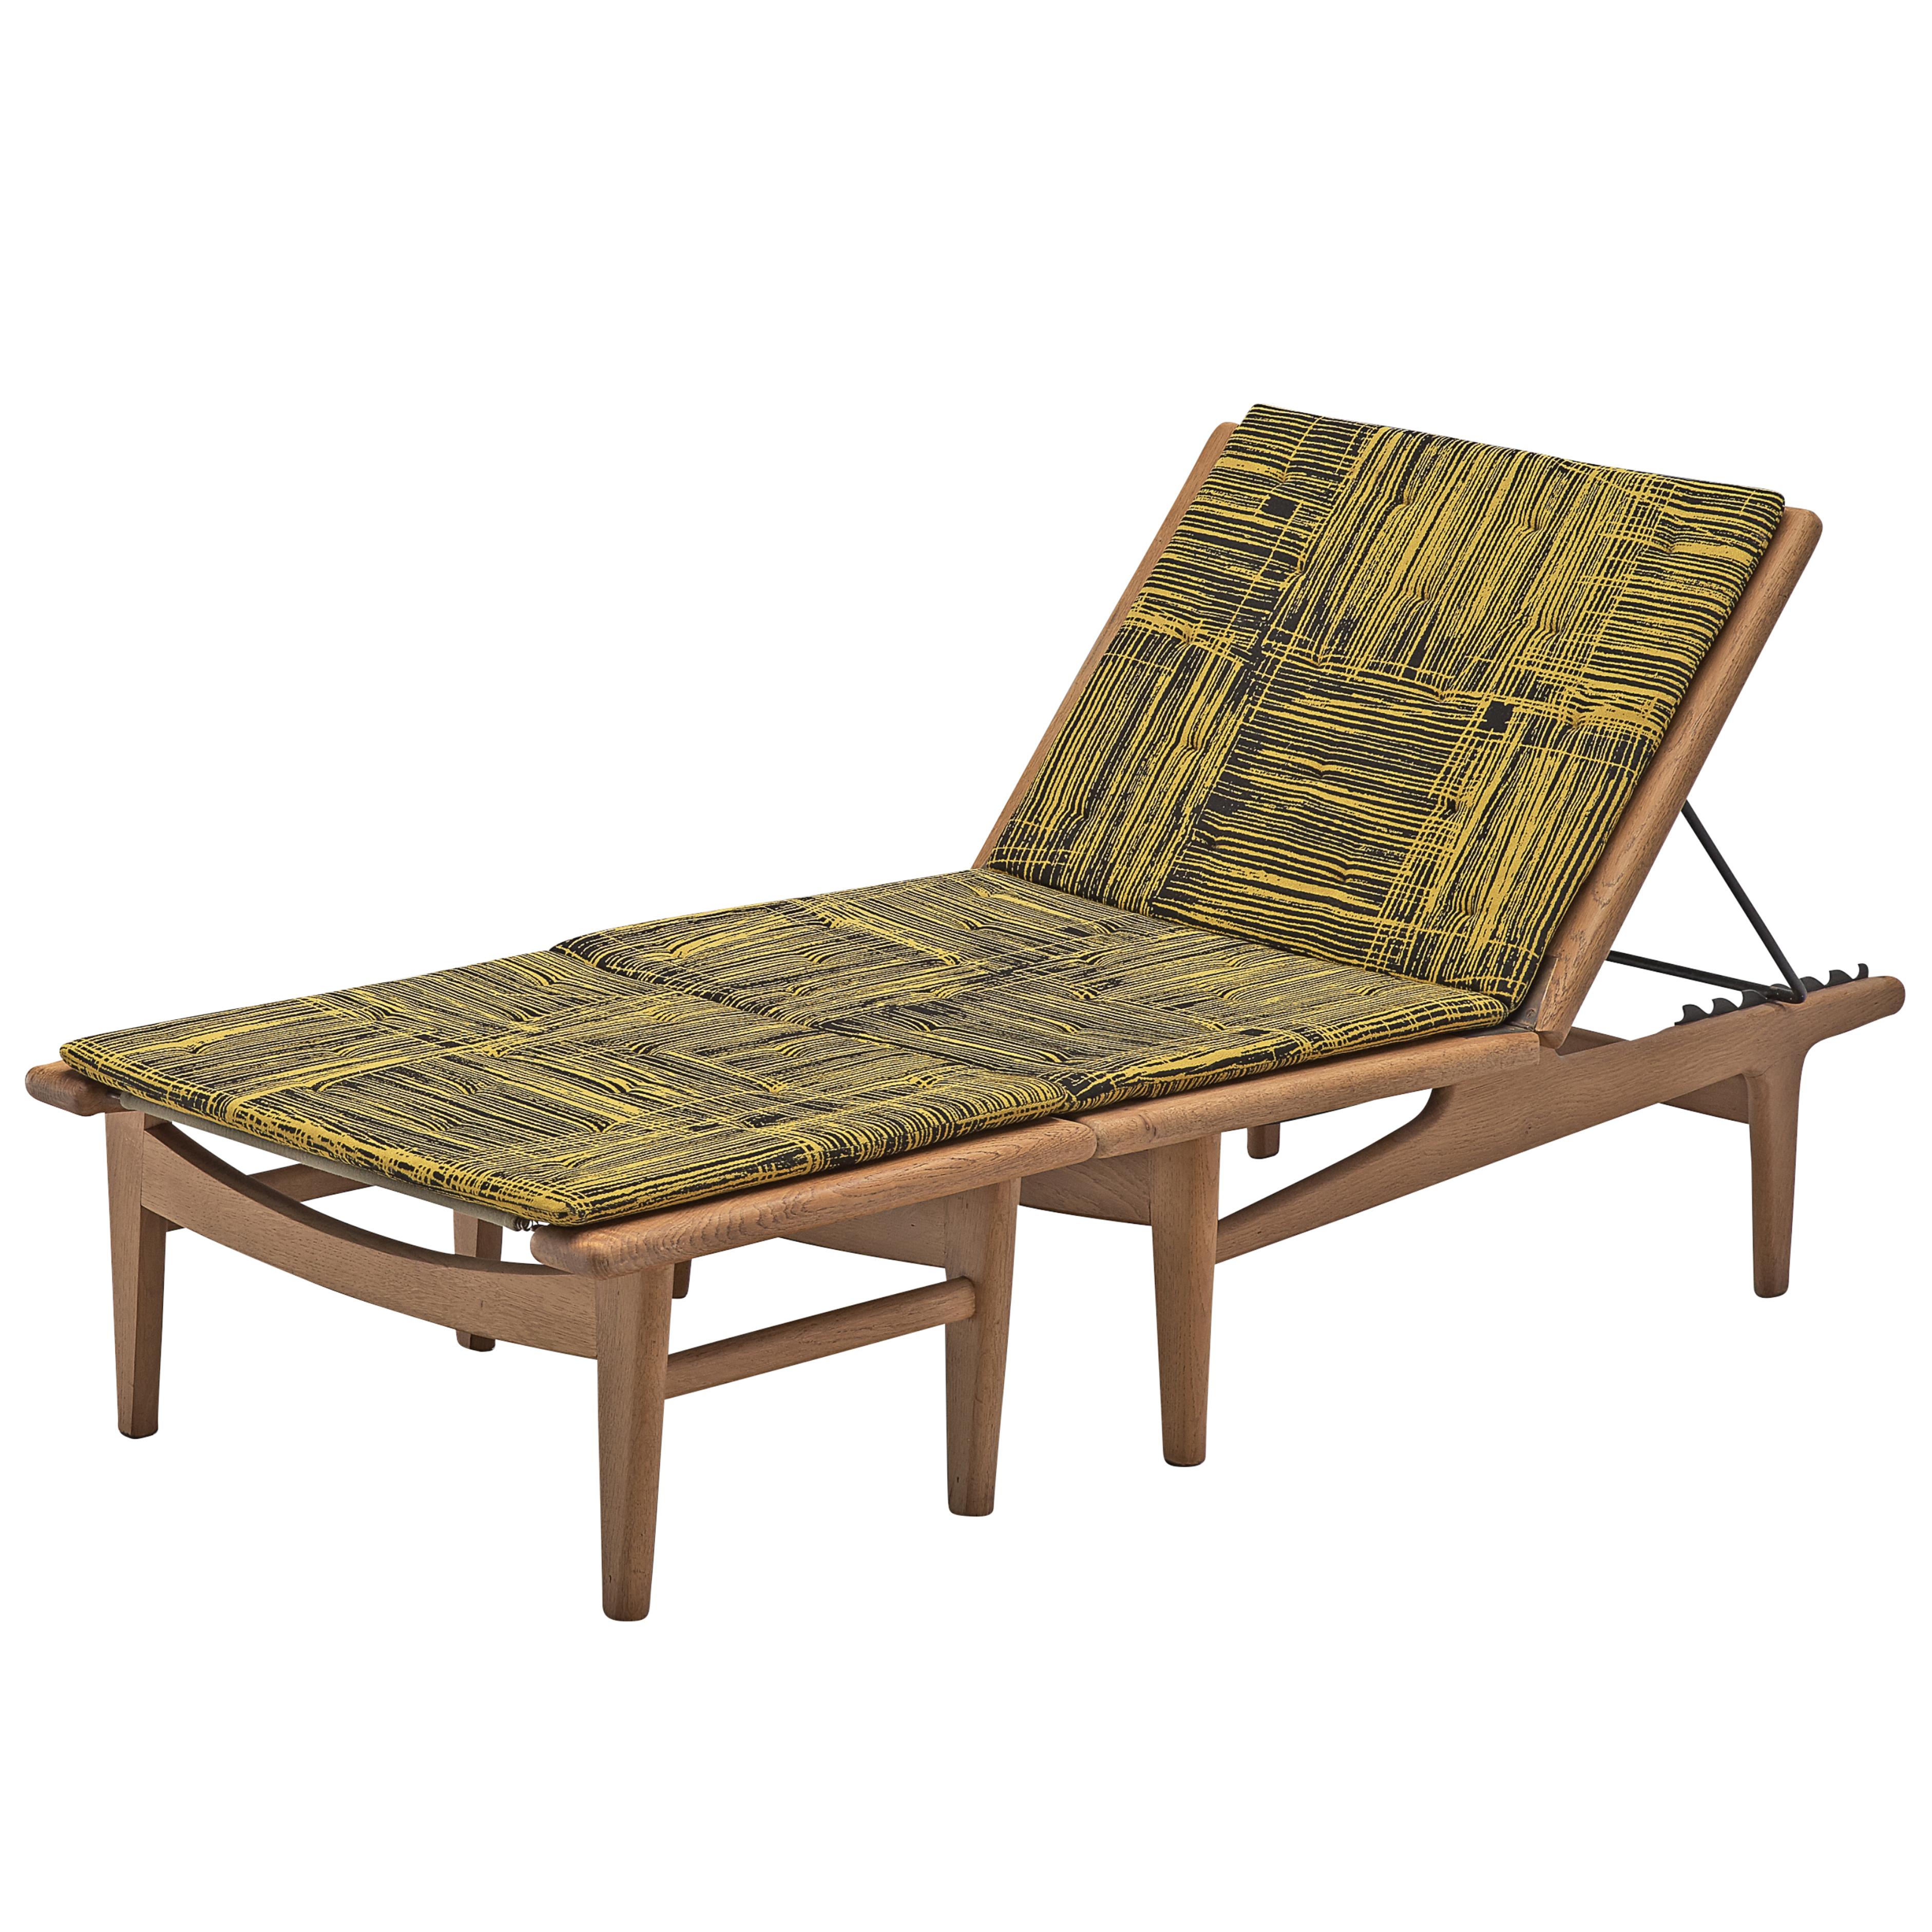 Hans J. Wegner for GETAMA, chaise lounge with ottoman model GE01, oak, metal, fabric, Denmark, design 1954

This chaise lounge consists out of two sections. An adjustable lounge chair and an ottoman which can be combined together into a daybed.